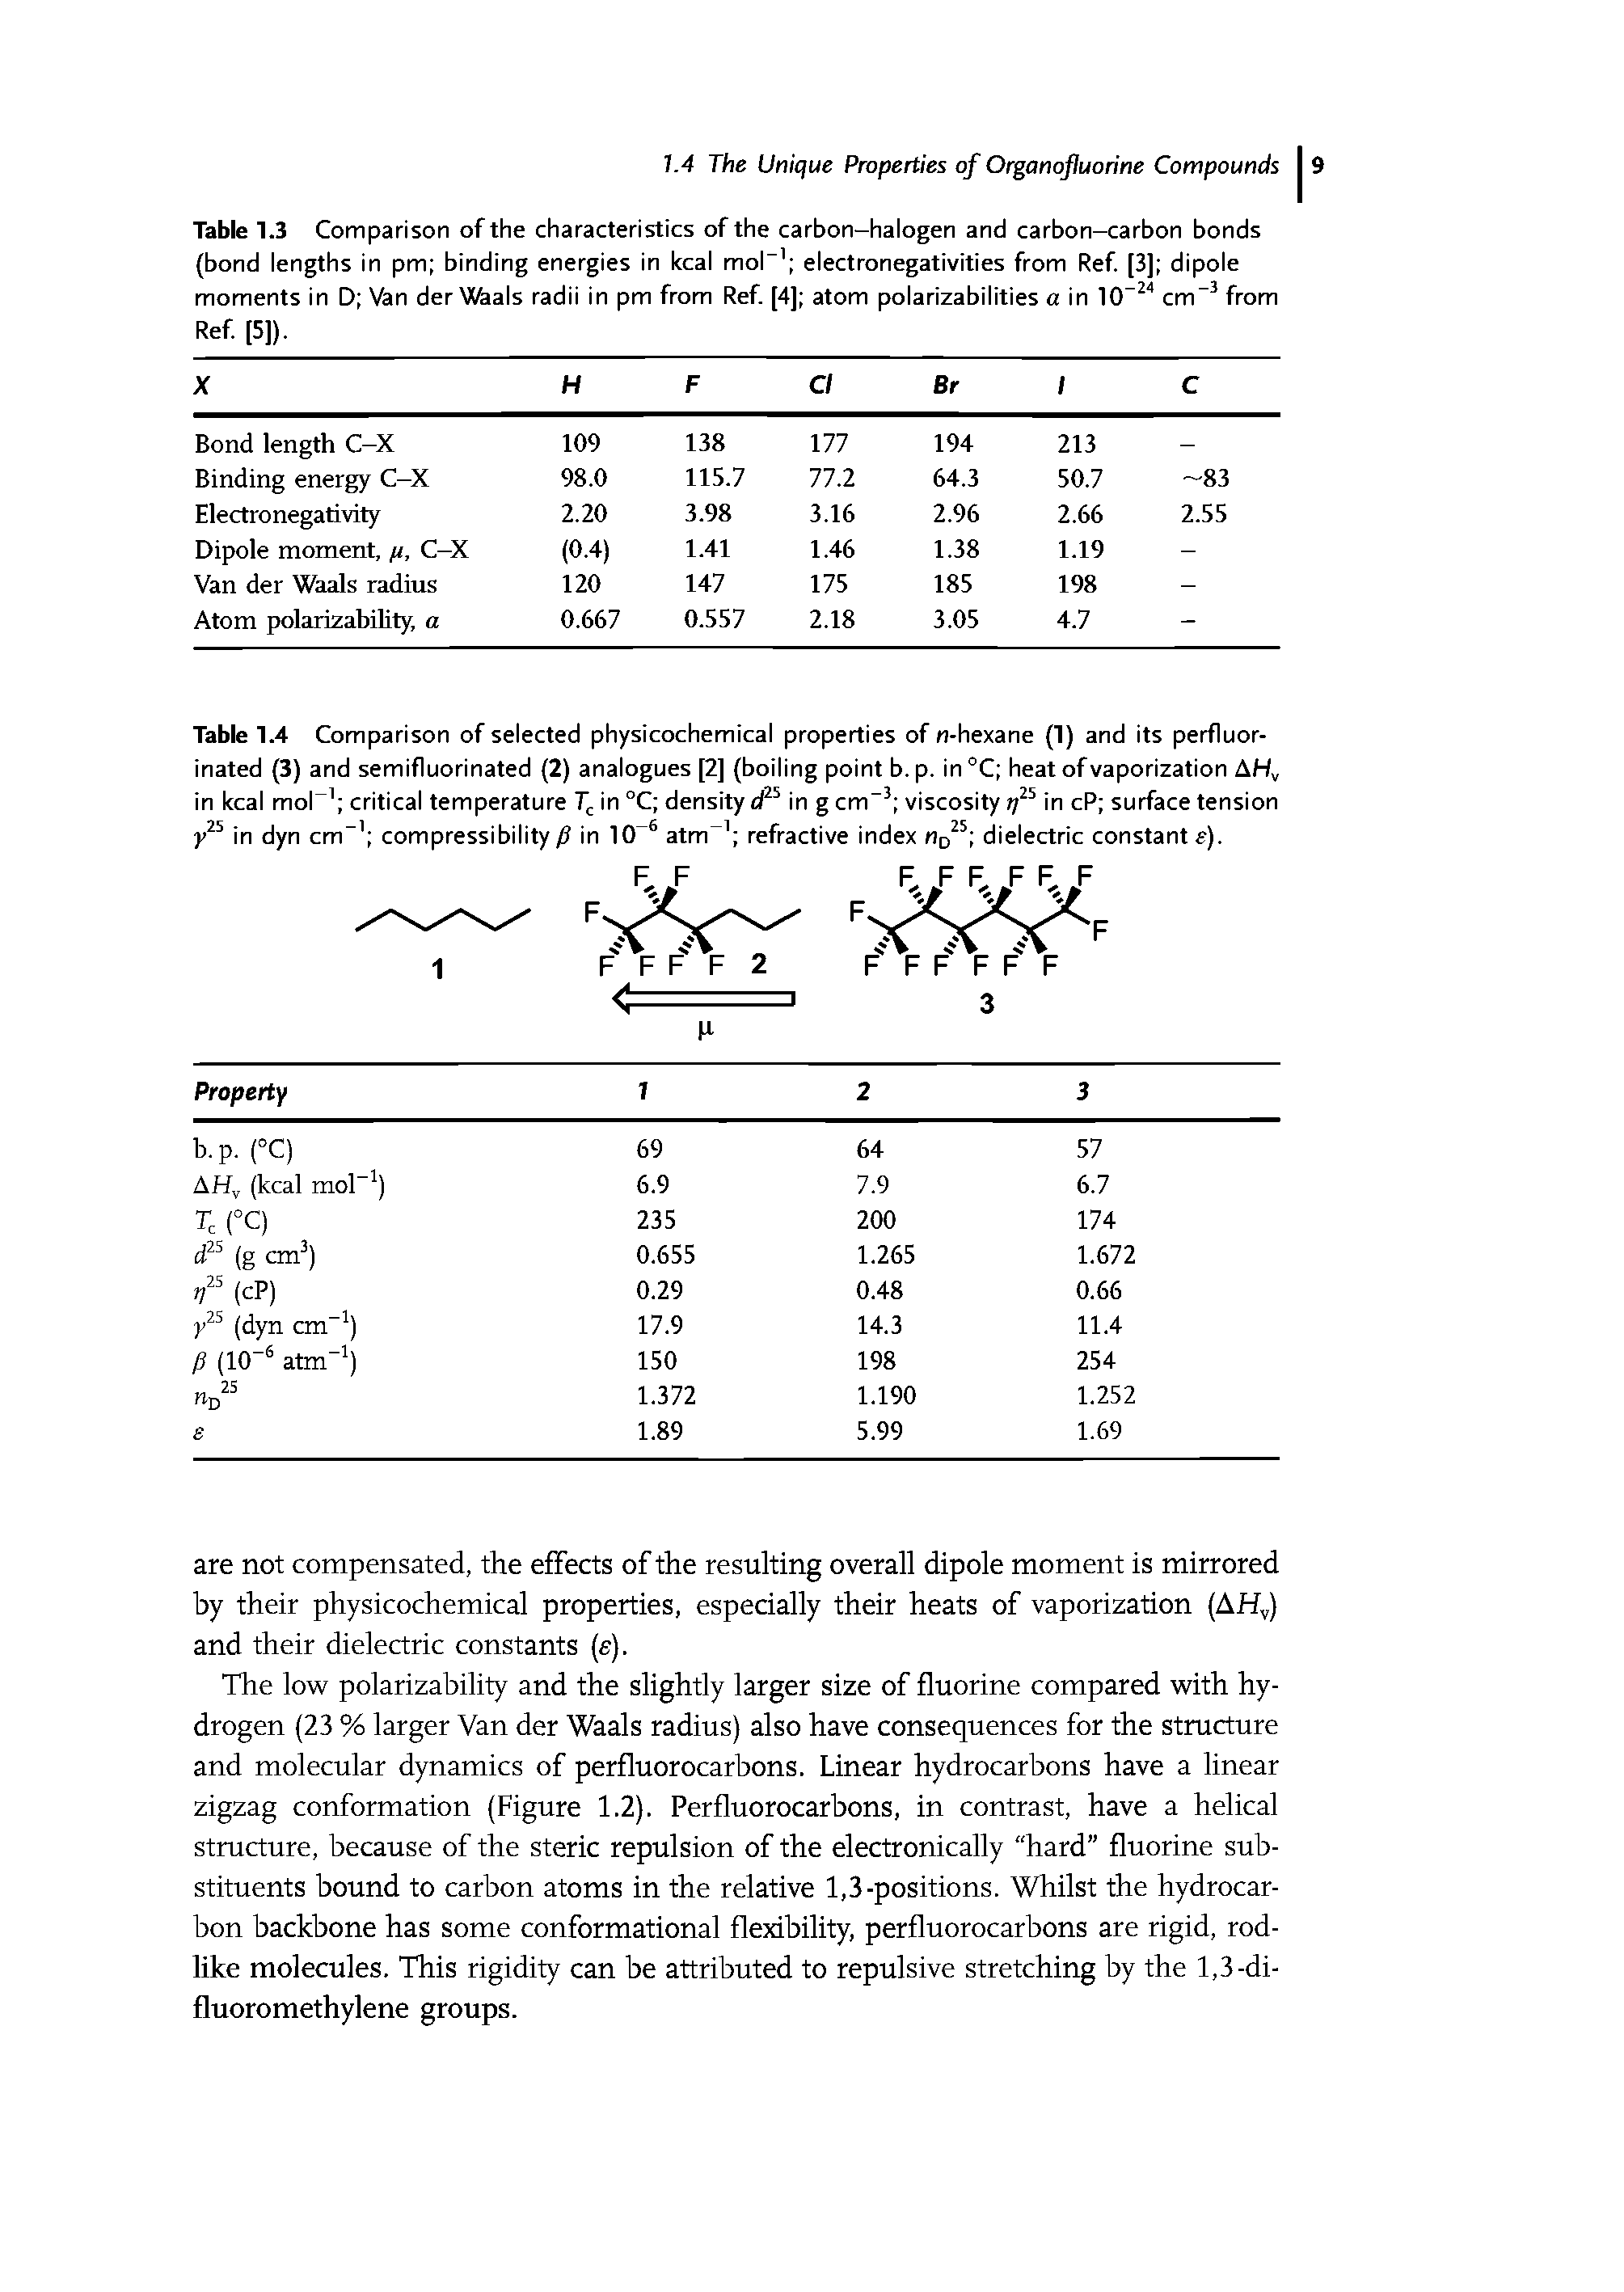 Table 1.3 Comparison of the characteristics of the carbon-halogen and carbon-carbon bonds (bond lengths in pm binding energies in kcal mol electronegativities from Ref [3] dipole moments in D Van derXXftials radii in pm from Ref [4] atom polarizabilities a in 10 cm from Ref [5]).